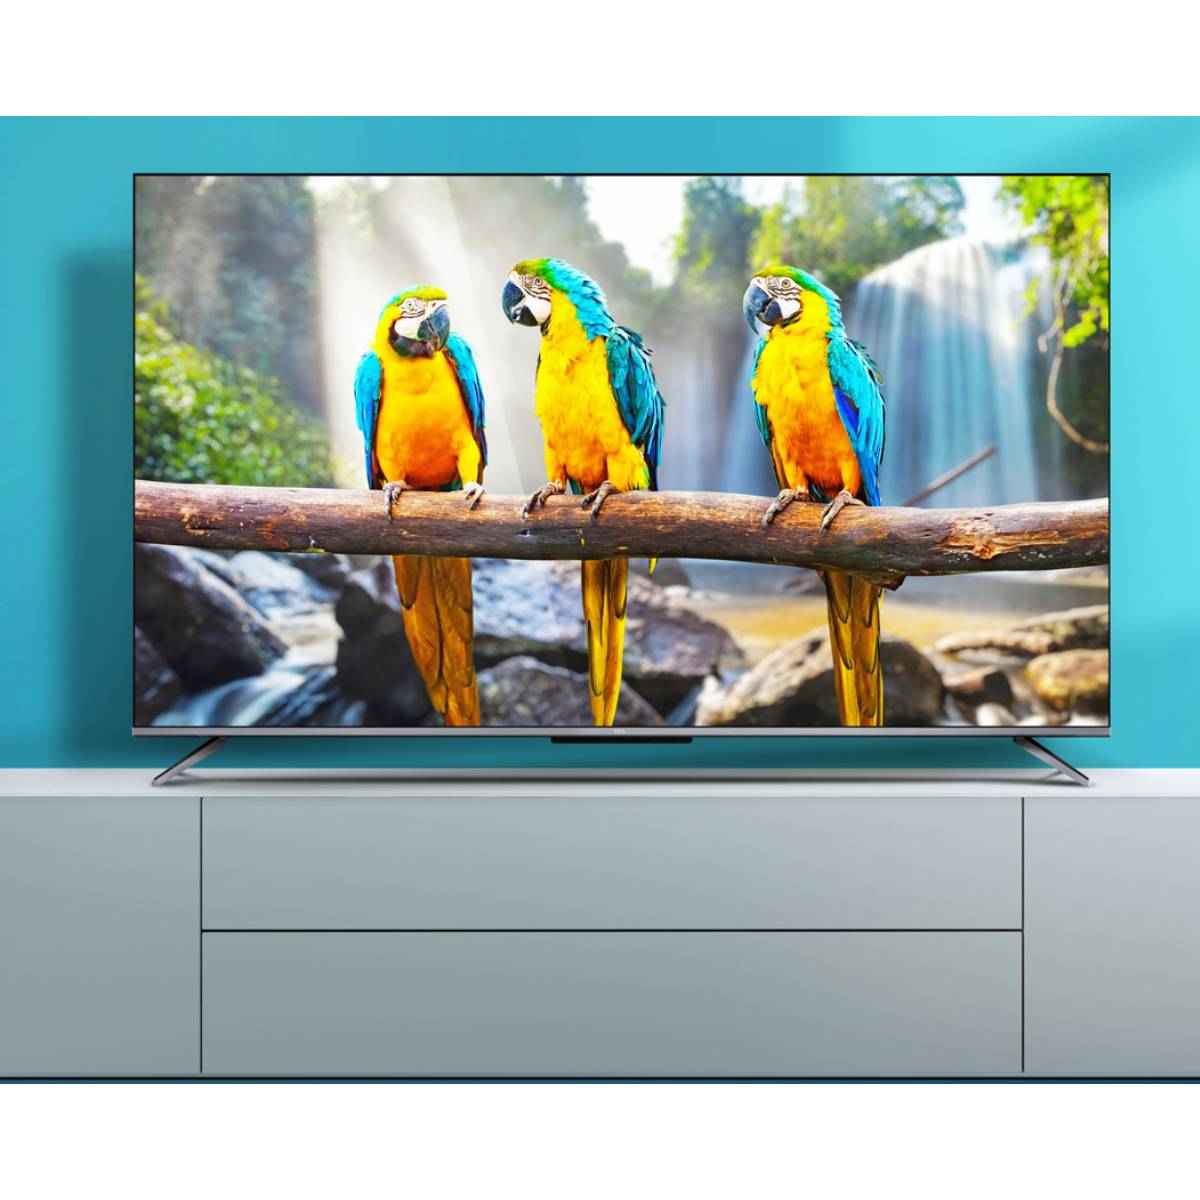 TCL 65 inch 4K HDR Android Smart TV (P715)